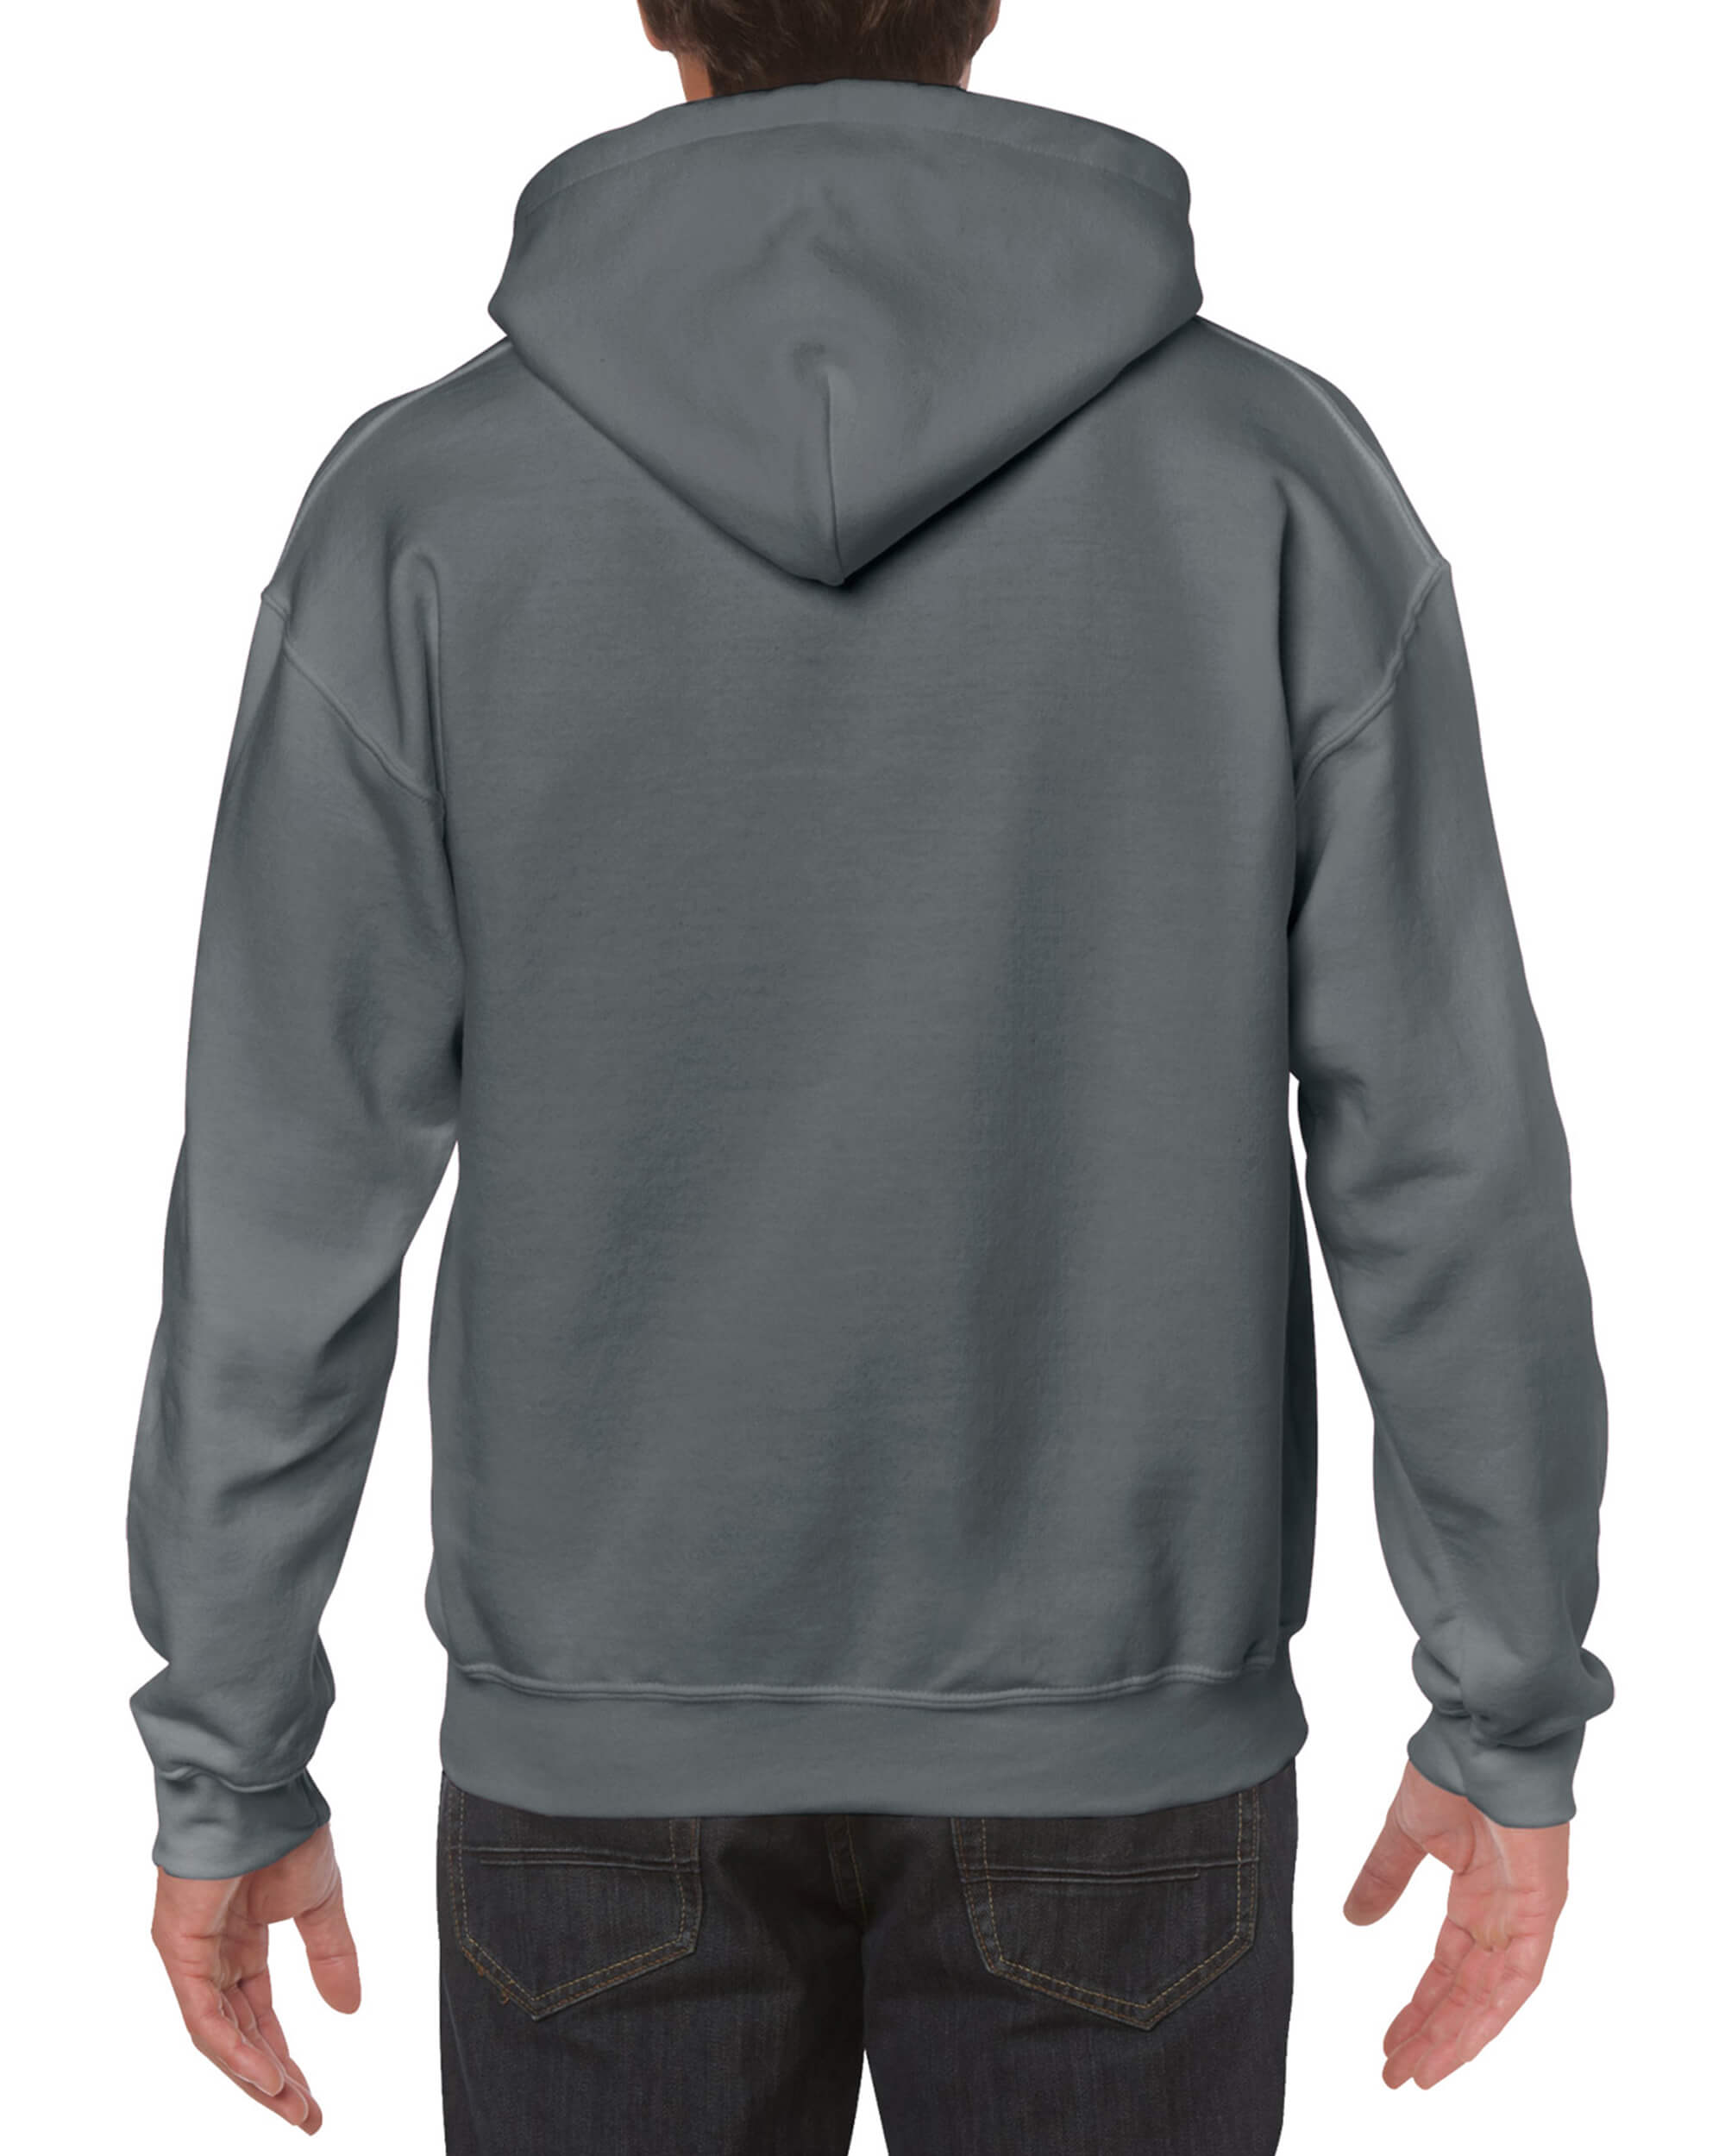 Pullover Hoodie - Charcoal